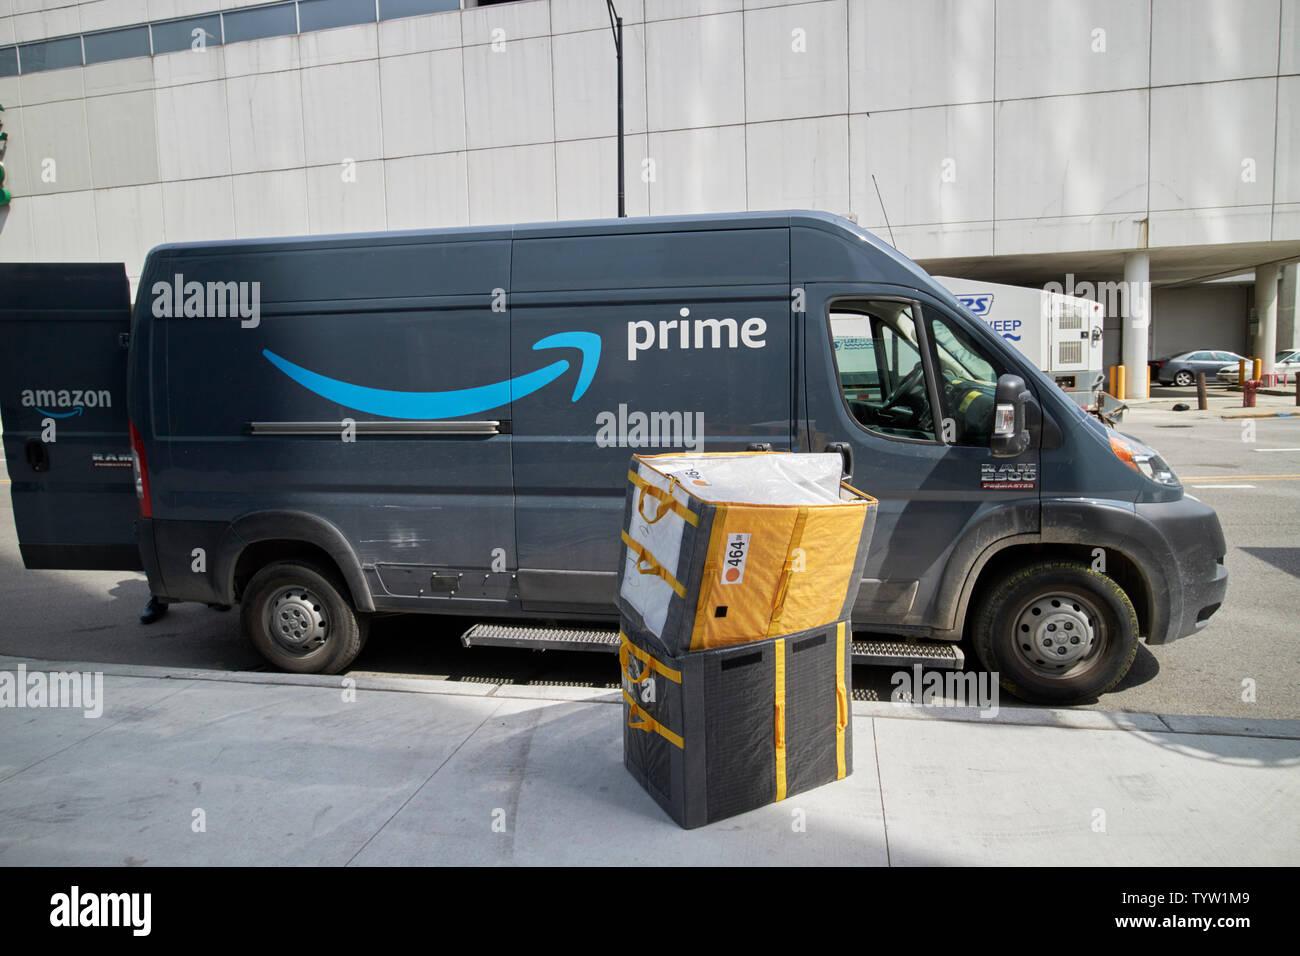 https://c8.alamy.com/comp/TYW1M9/amazon-prime-delivery-van-in-downtown-chicago-il-usa-TYW1M9.jpg